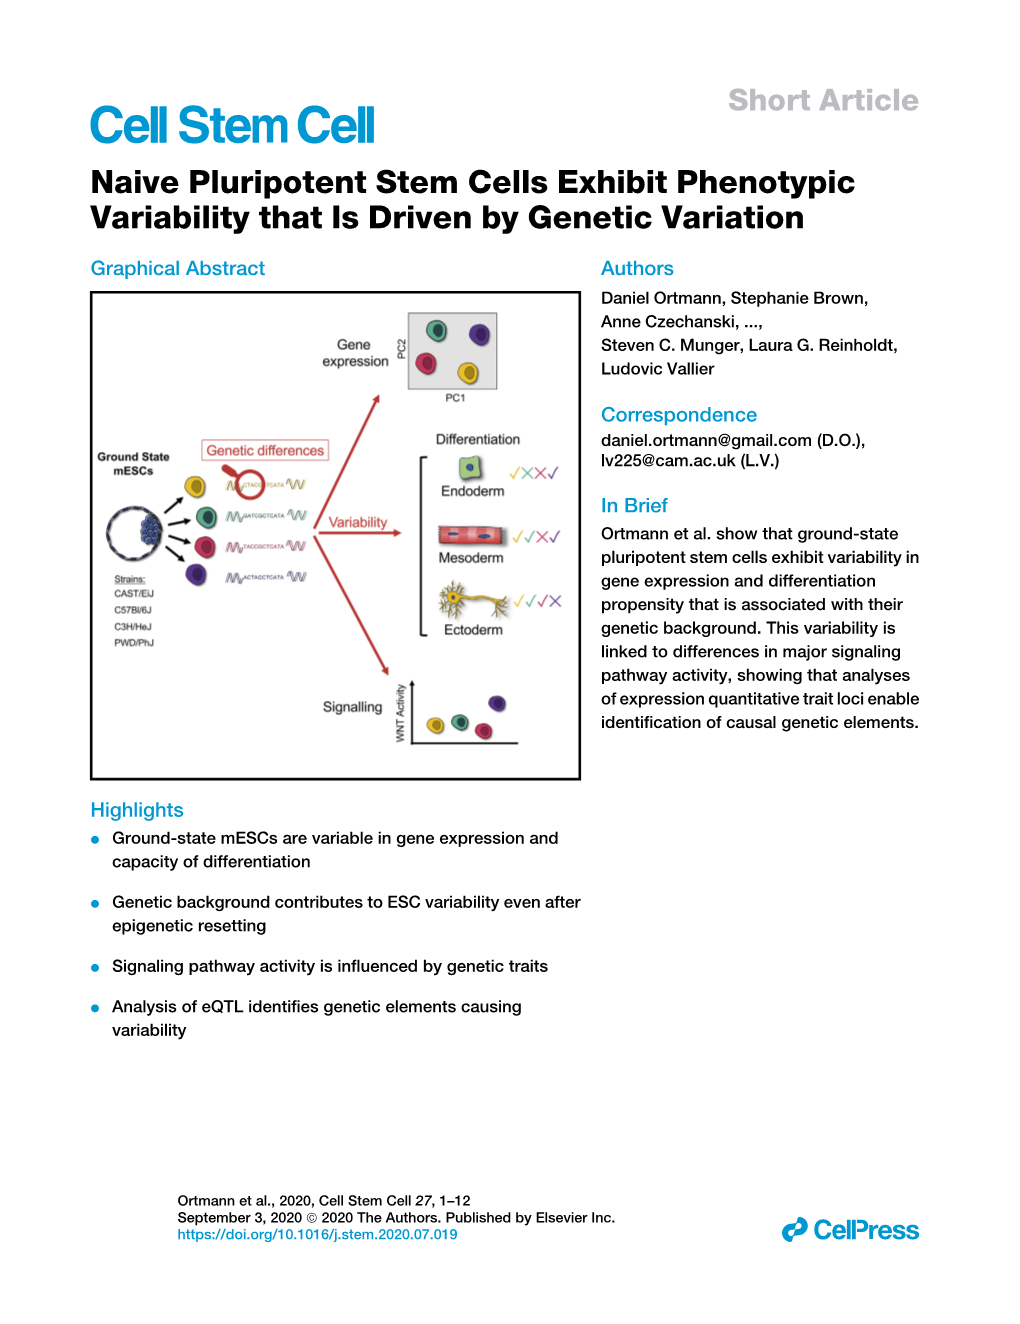 Naive Pluripotent Stem Cells Exhibit Phenotypic Variability That Is Driven by Genetic Variation